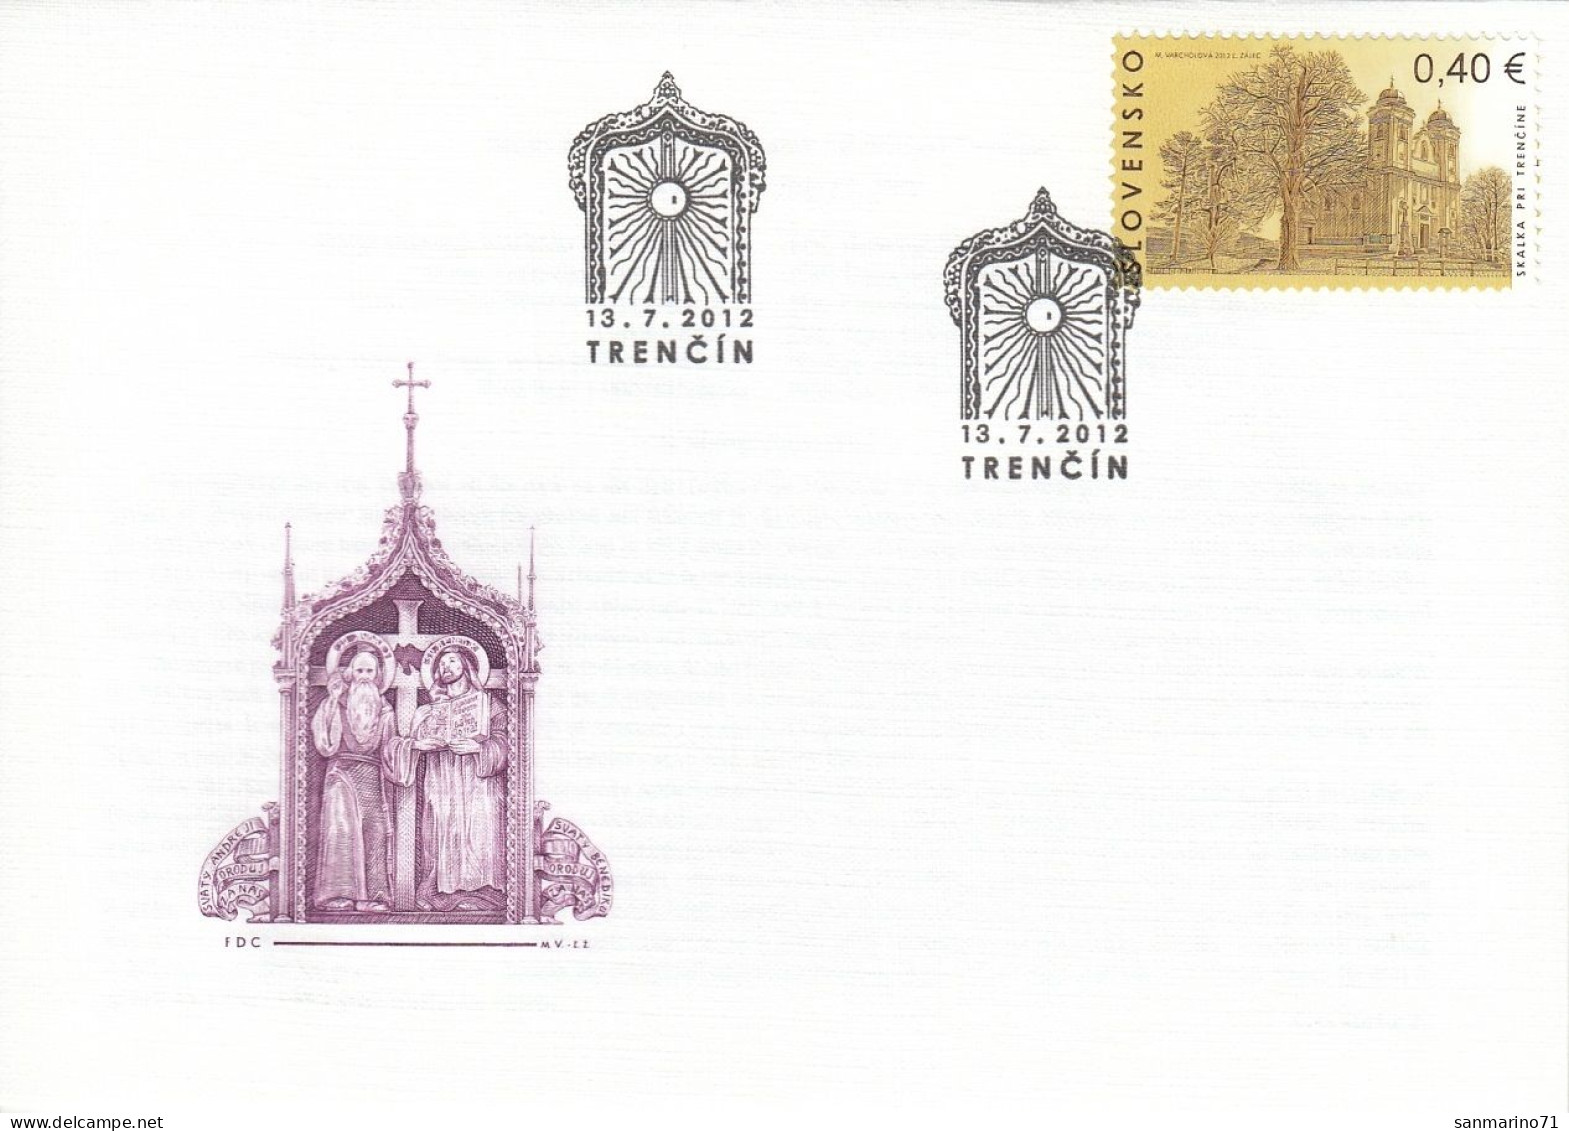 FDC SLOVAKIA 688 - Churches & Cathedrals